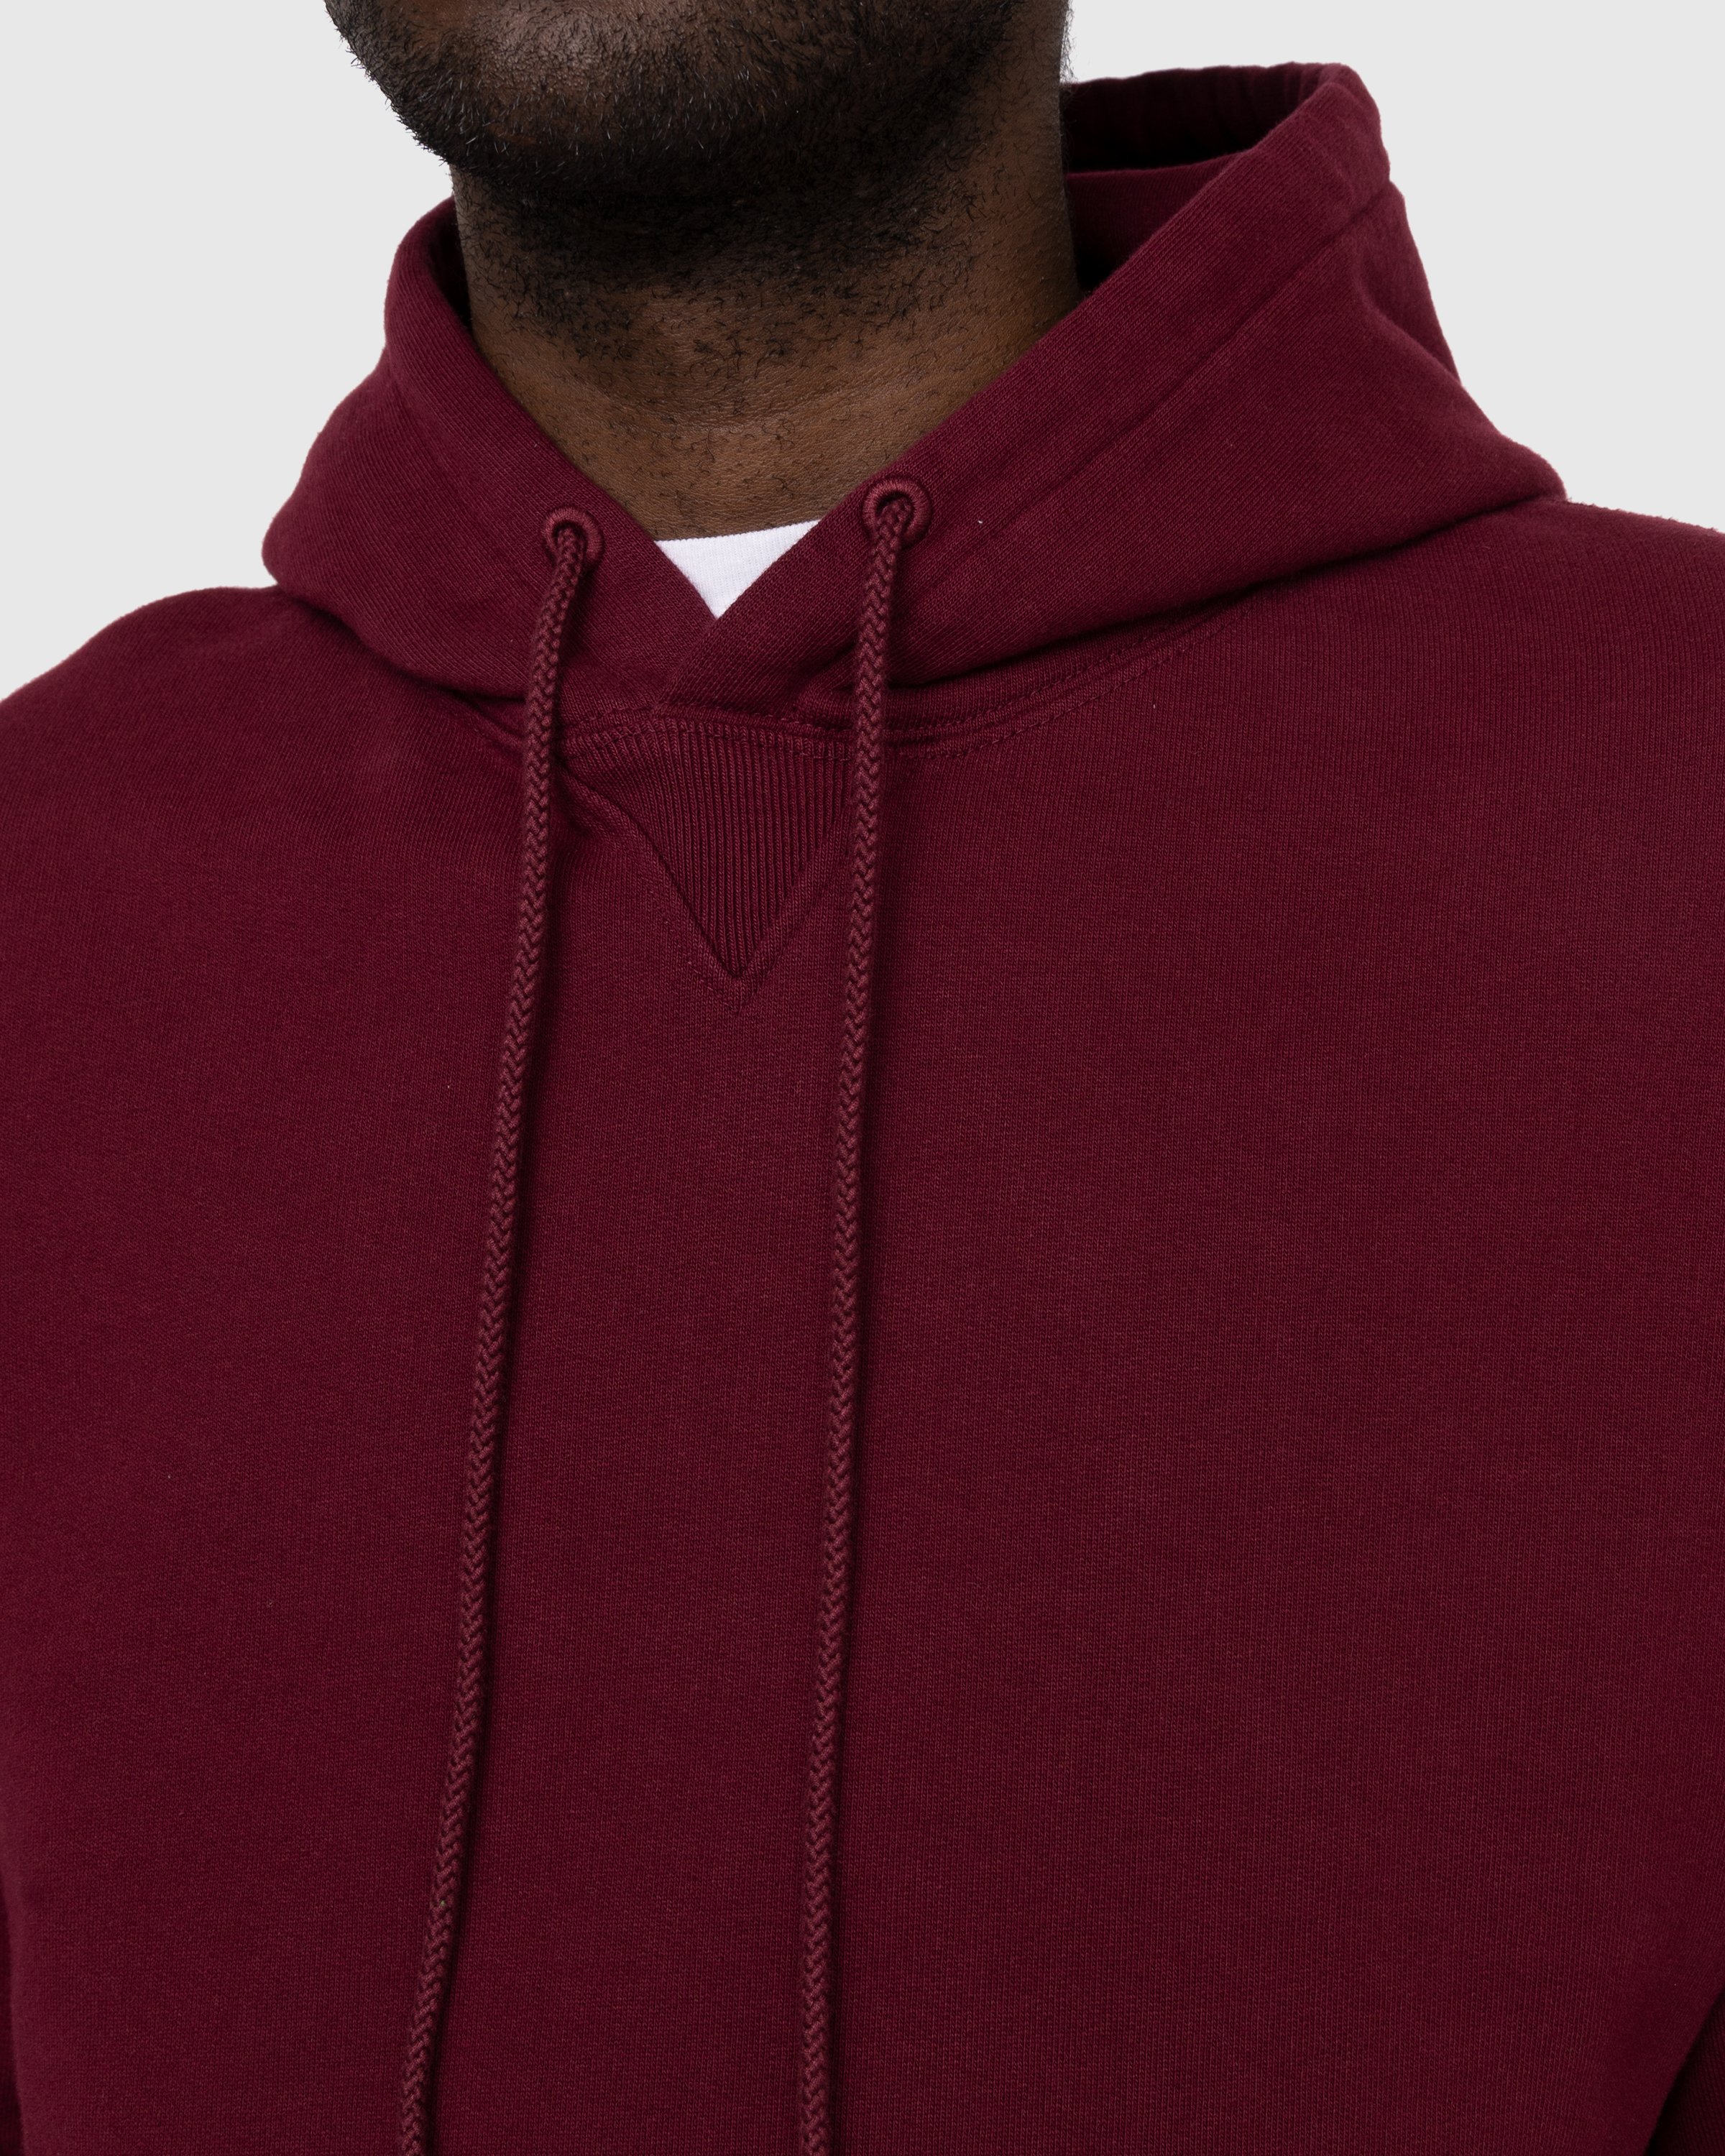 Highsnobiety - Classic Fleece Hoodie Bordeaux - Clothing - Red - Image 7